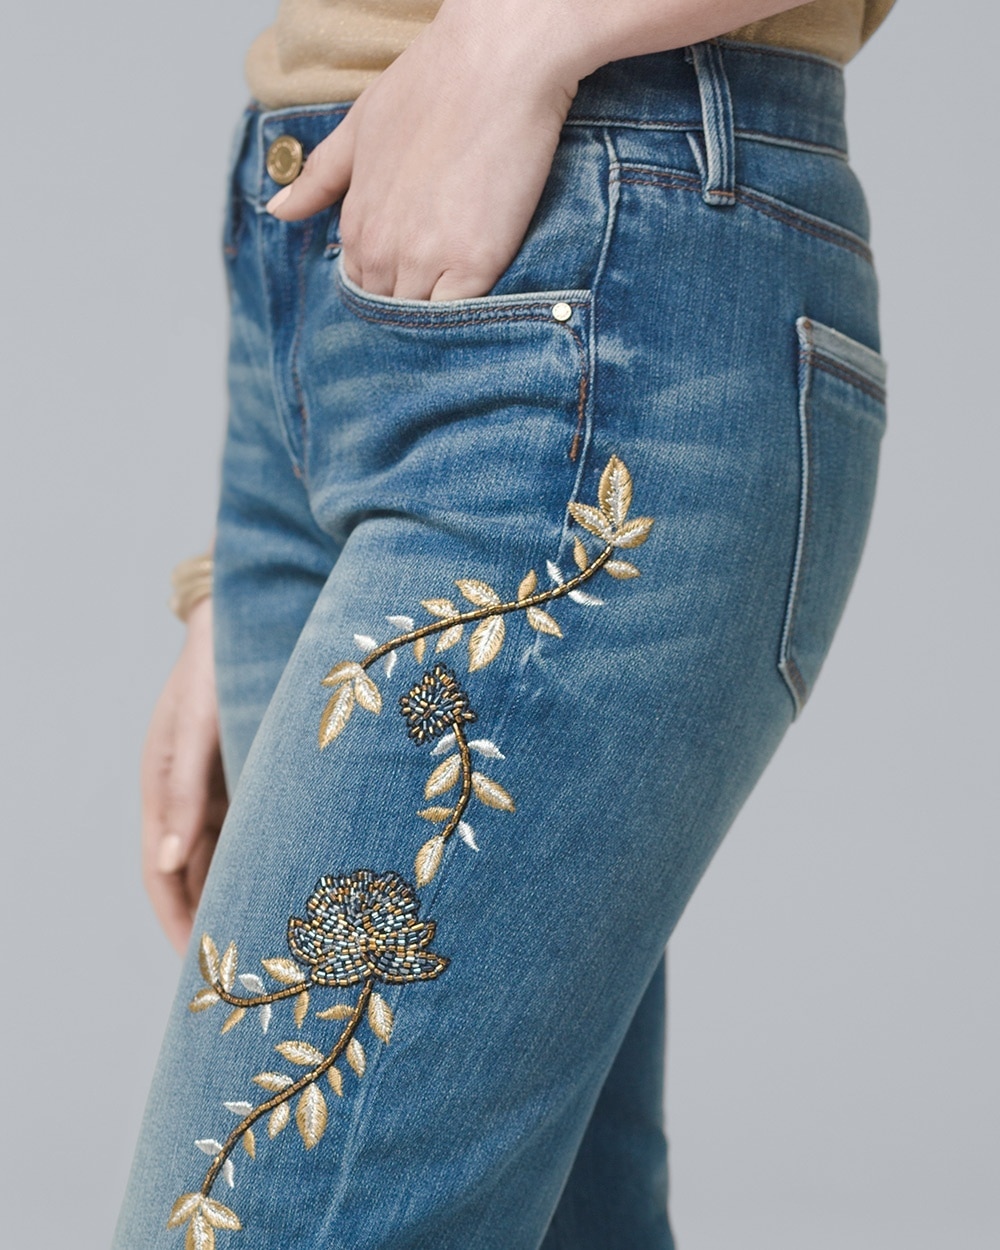 Embroidered Girlfriend Jeans - White House Black Market